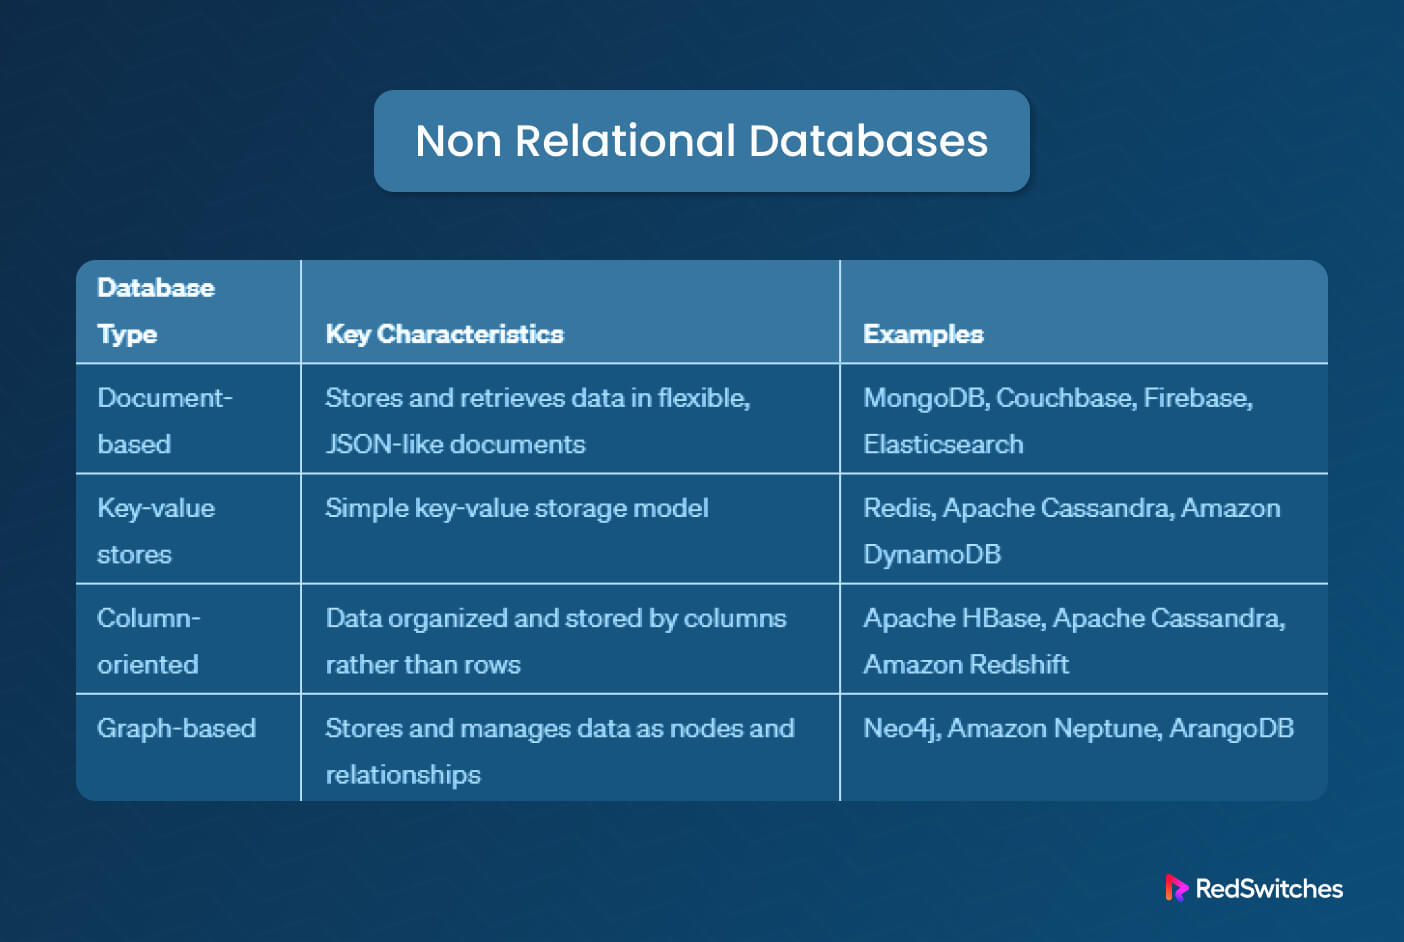 Key differences between non relational databases